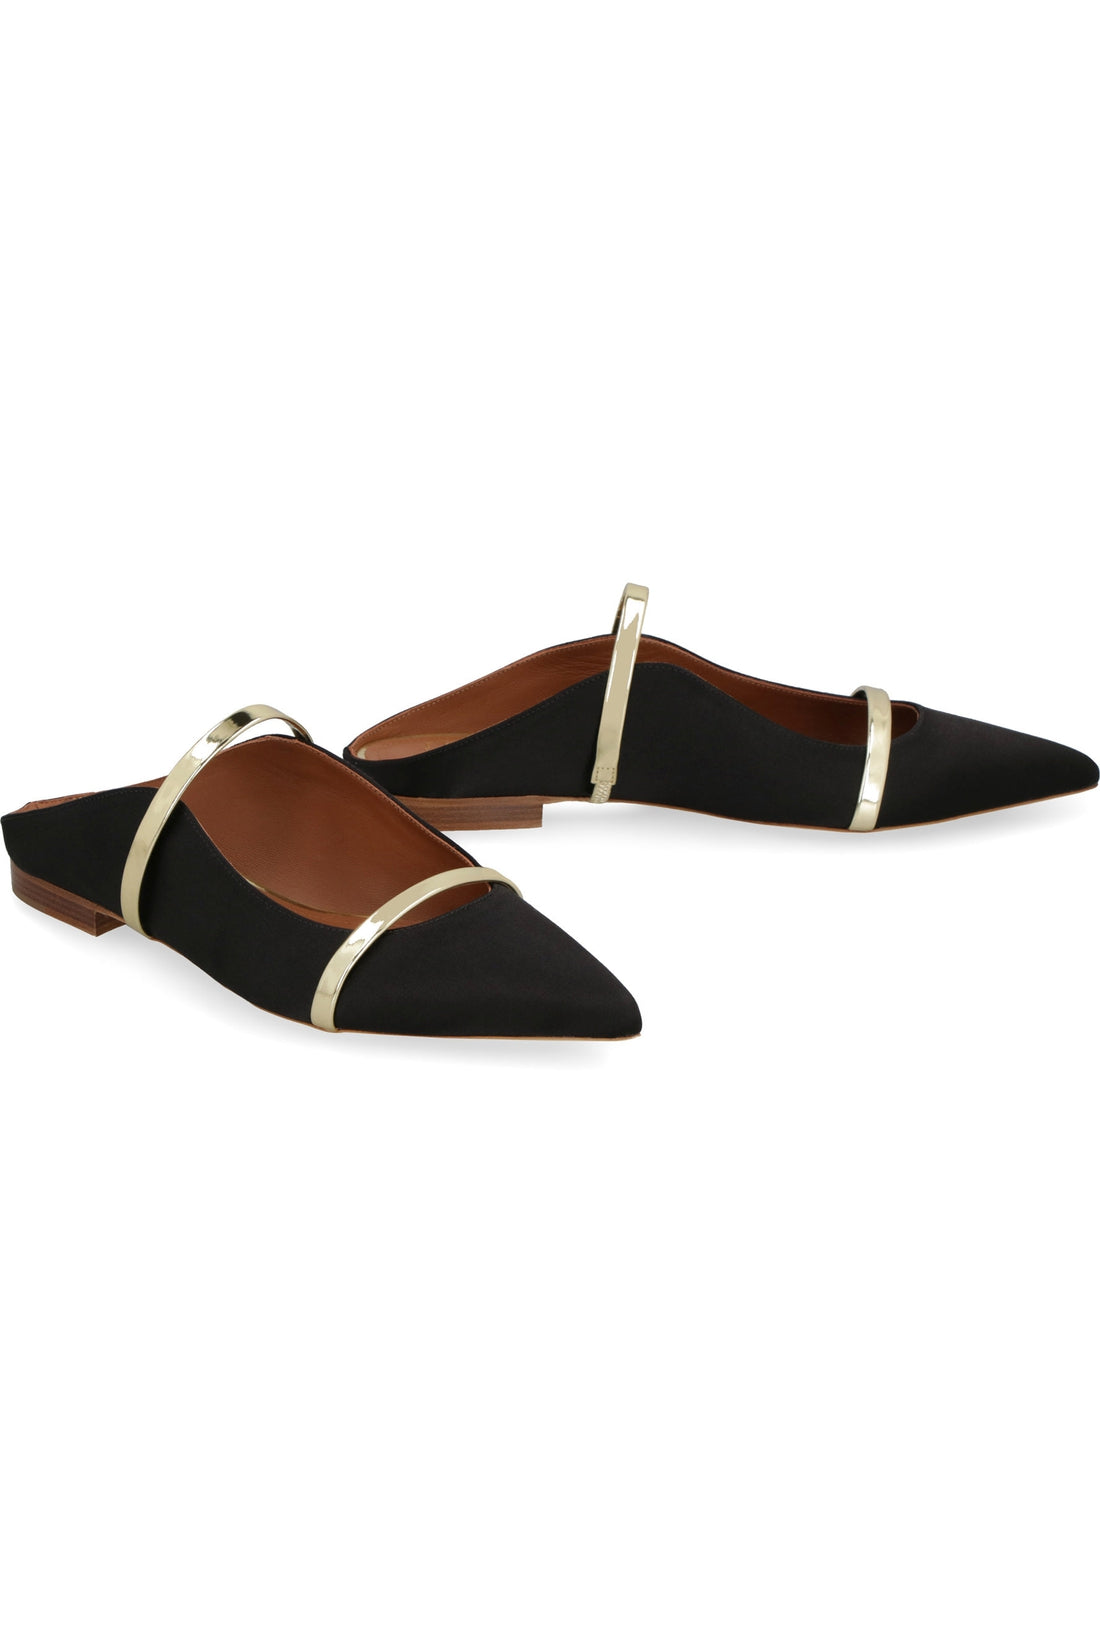 Malone Souliers-OUTLET-SALE-Maureen pointy-toe ballet flats-ARCHIVIST